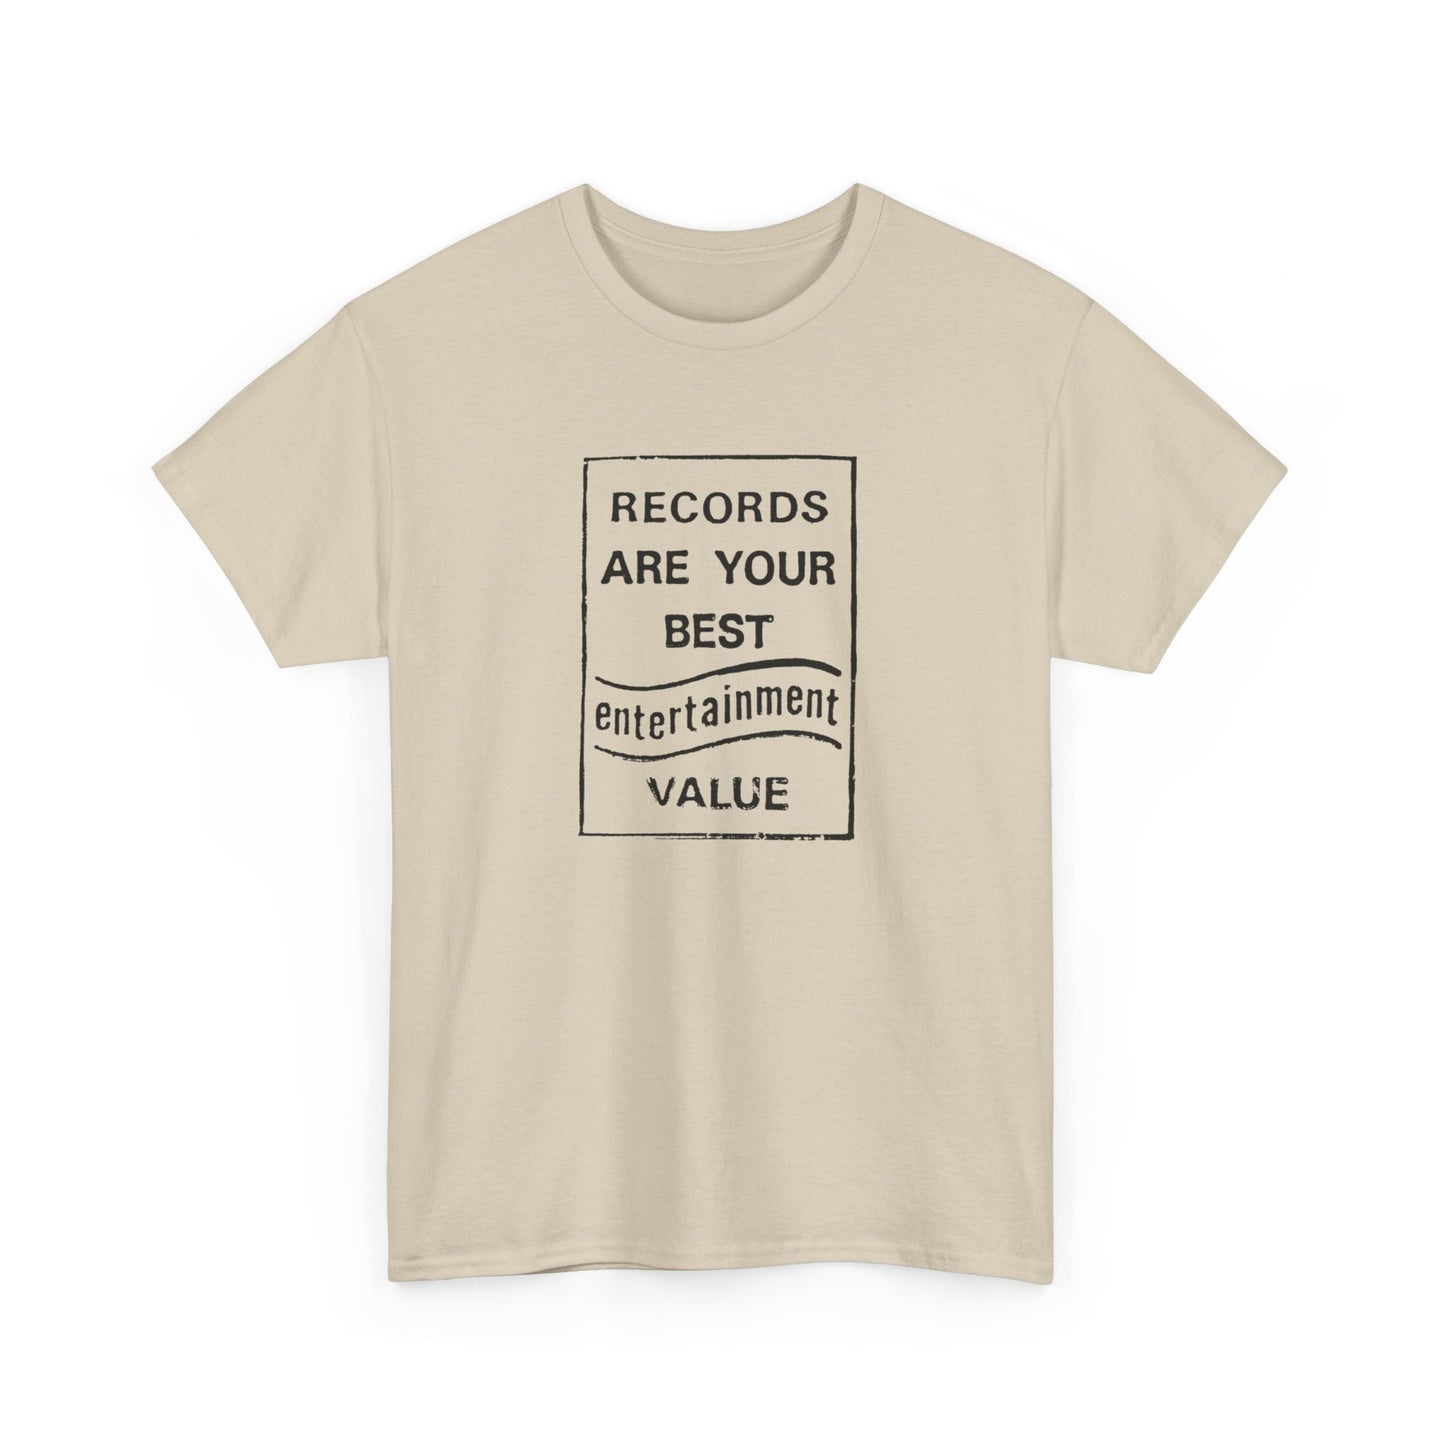 Retro Tee #205: Records Are Your Best Entertainment Value